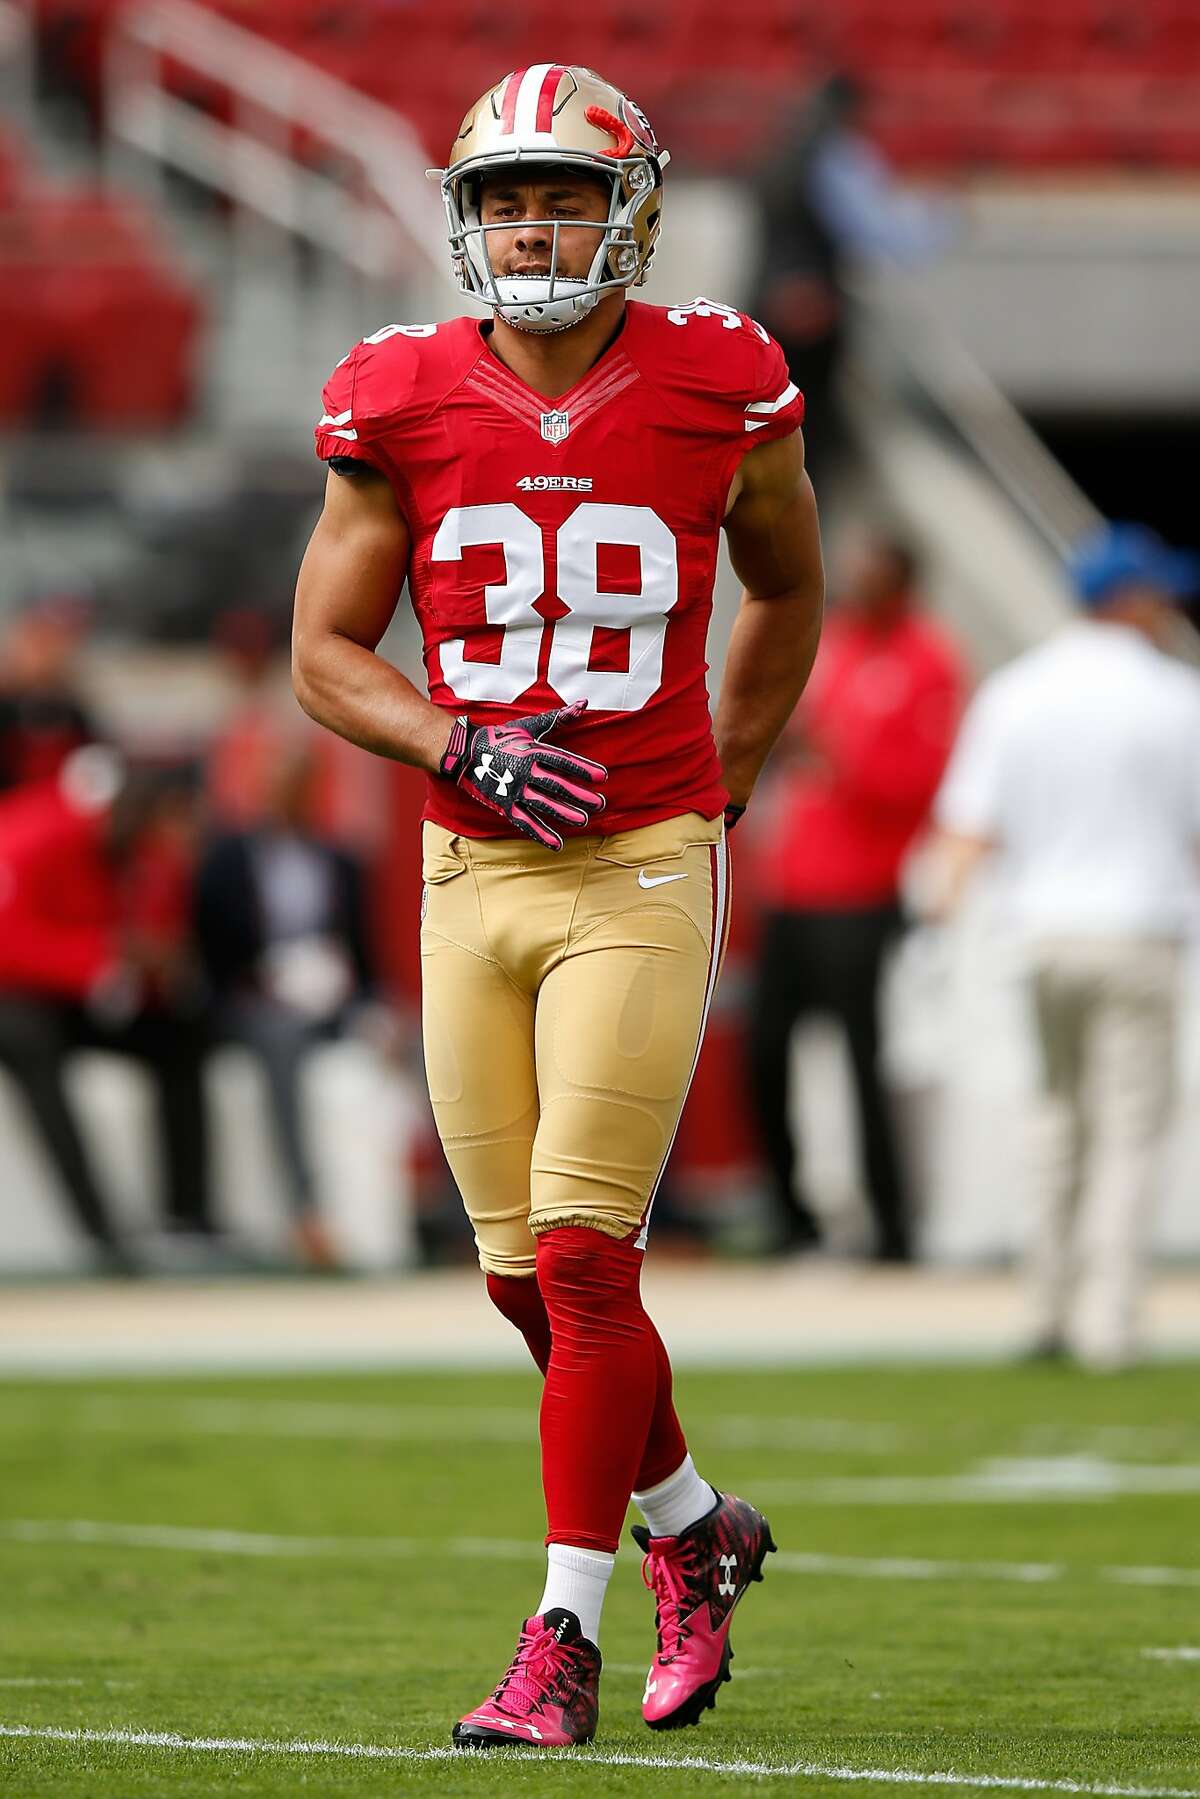 Running back Jarryd Hayne #38 of the San Francisco 49ers warms up prior to playing the Baltimore Ravens in their NFL game at Levi's Stadium on October 18, 2015 in Santa Clara, California.